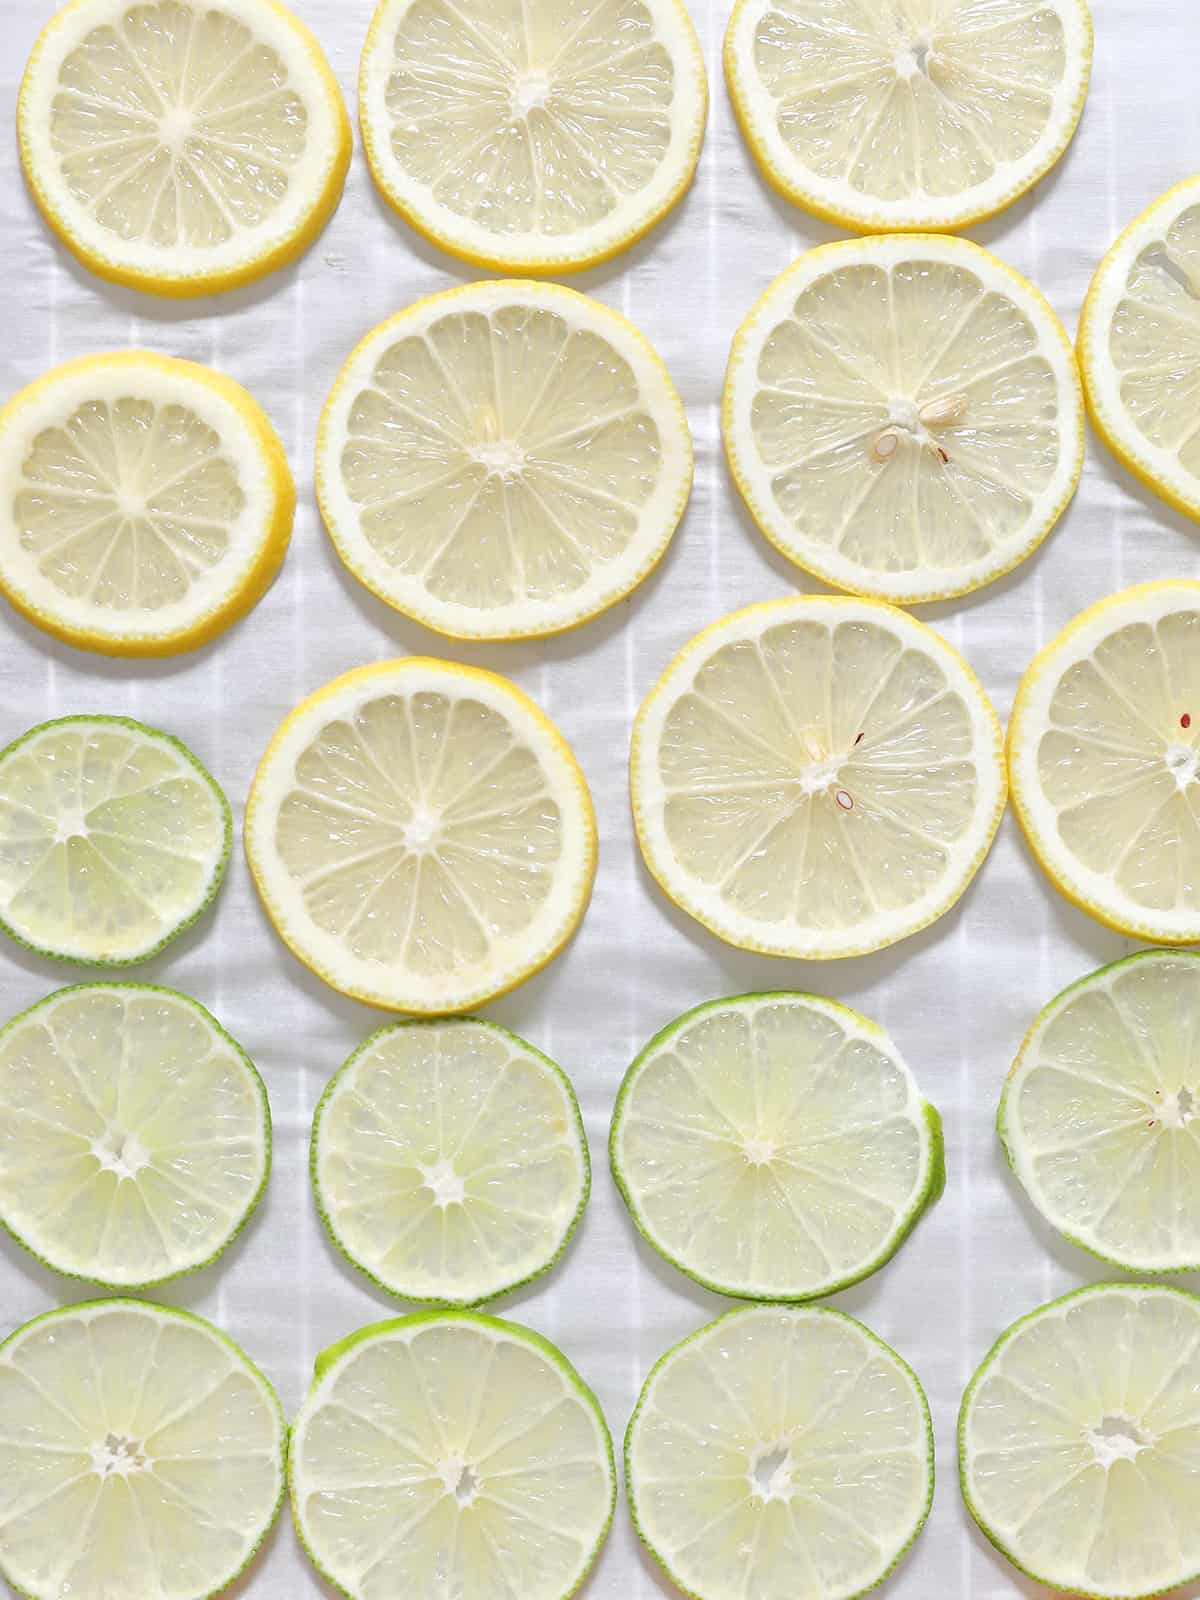 Slices of lemons and limes arranged on a sheet of parchment paper. 